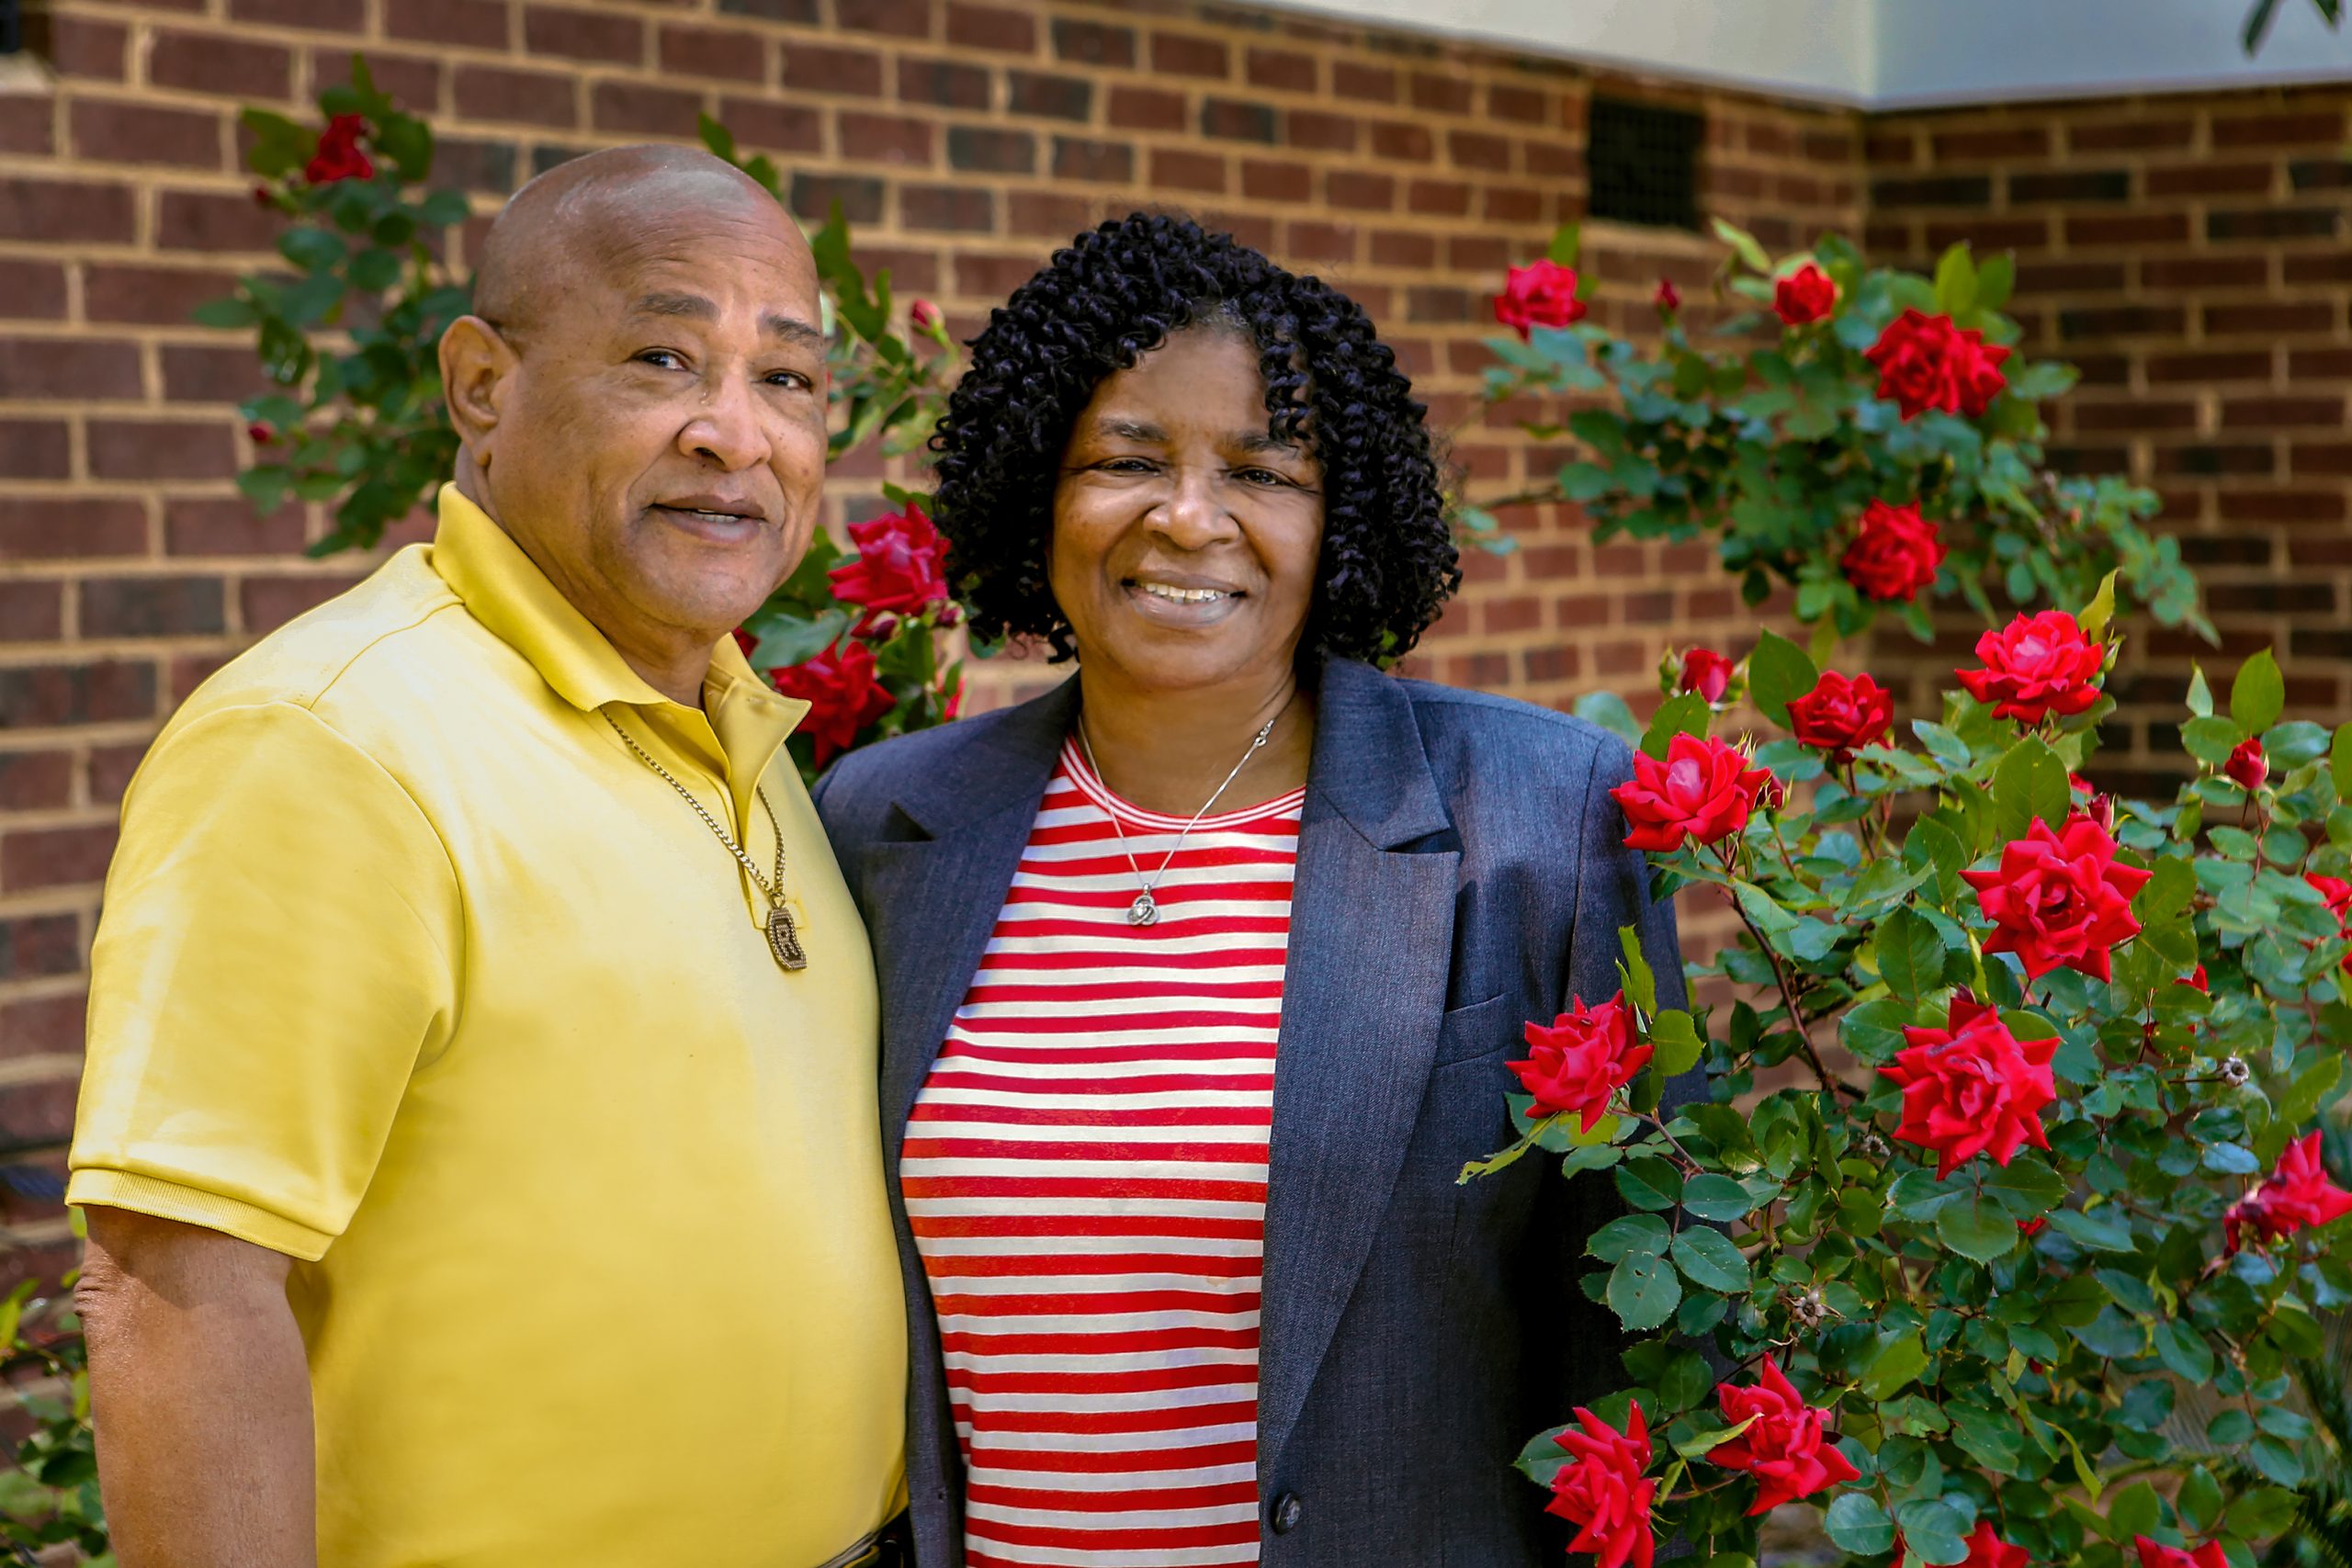 After retiring to Columbia in 1998, the Johnsons settled in the northeast area and put their green thumbs to work growing loquats among other shrubs.